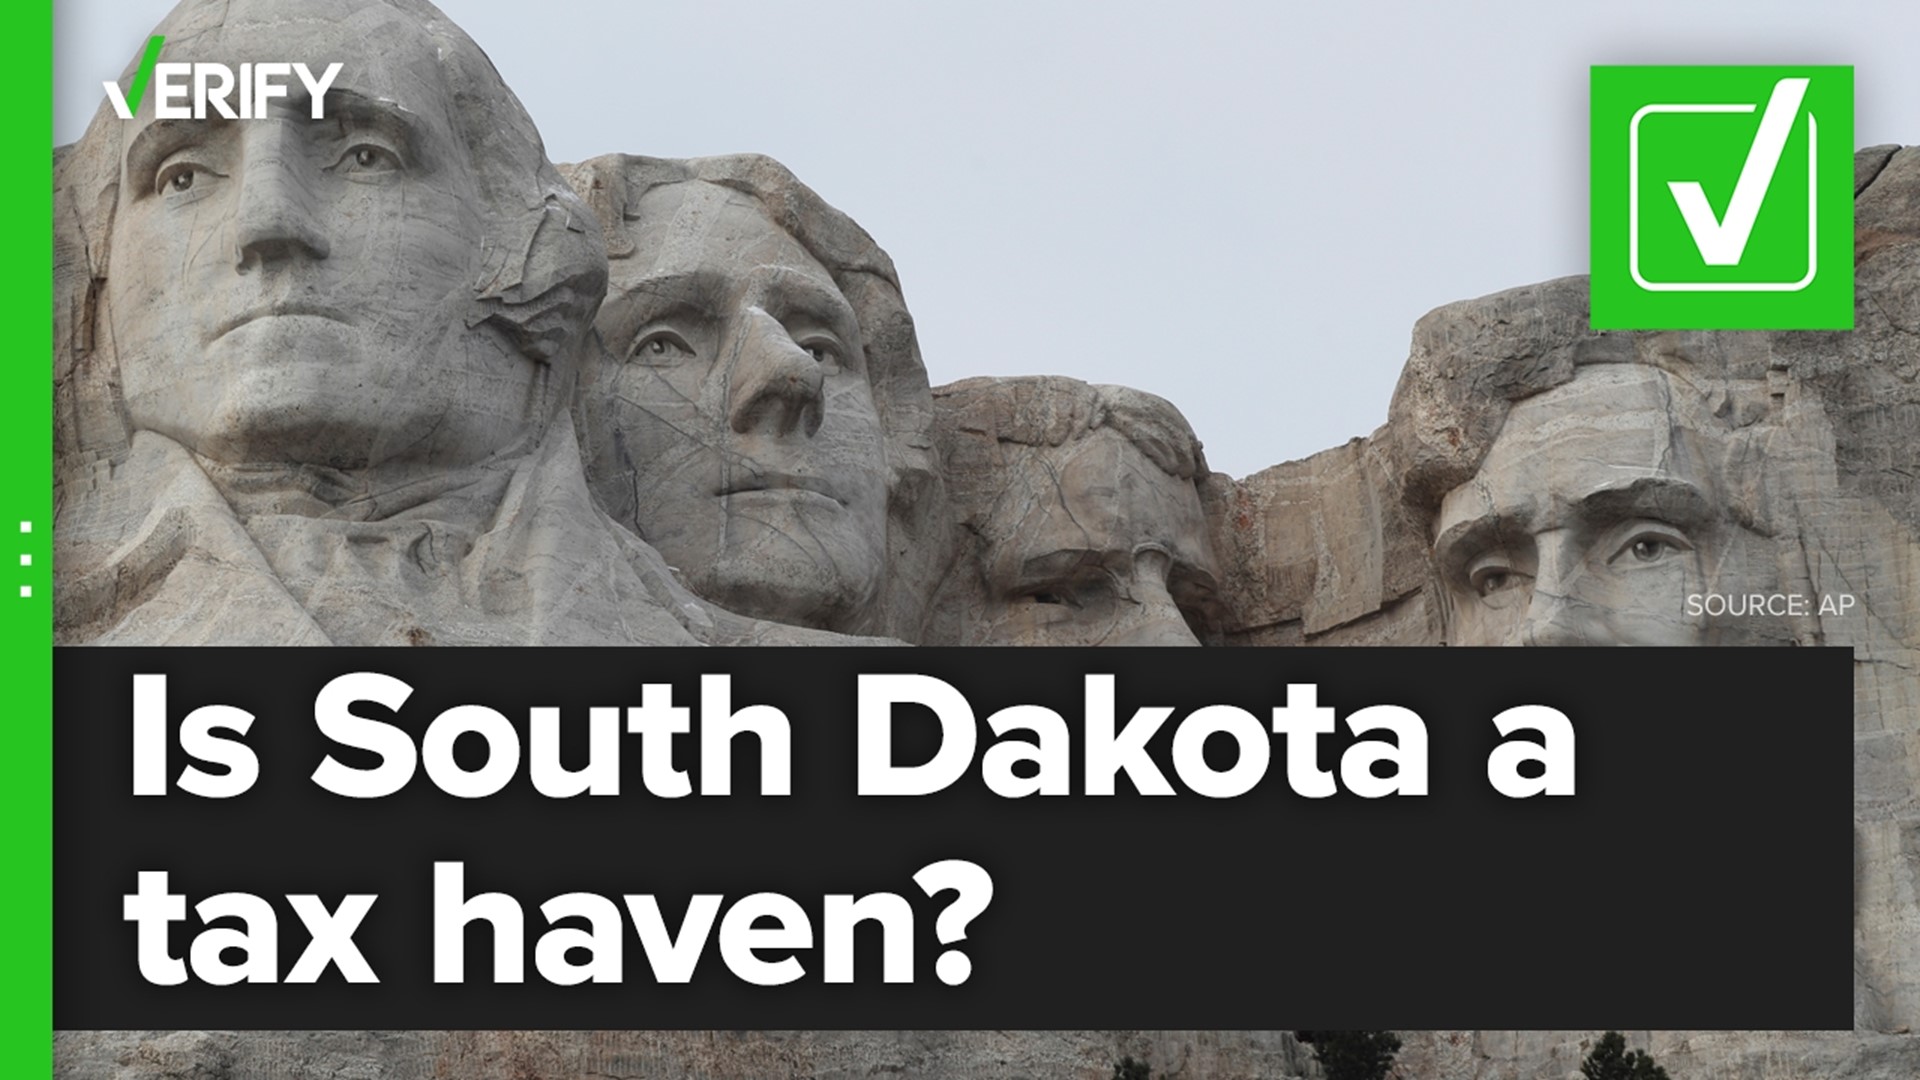 The Pandora Papers release shone a spotlight on South Dakota as a tax haven. VERIFY researched why the state and others have that reputation.